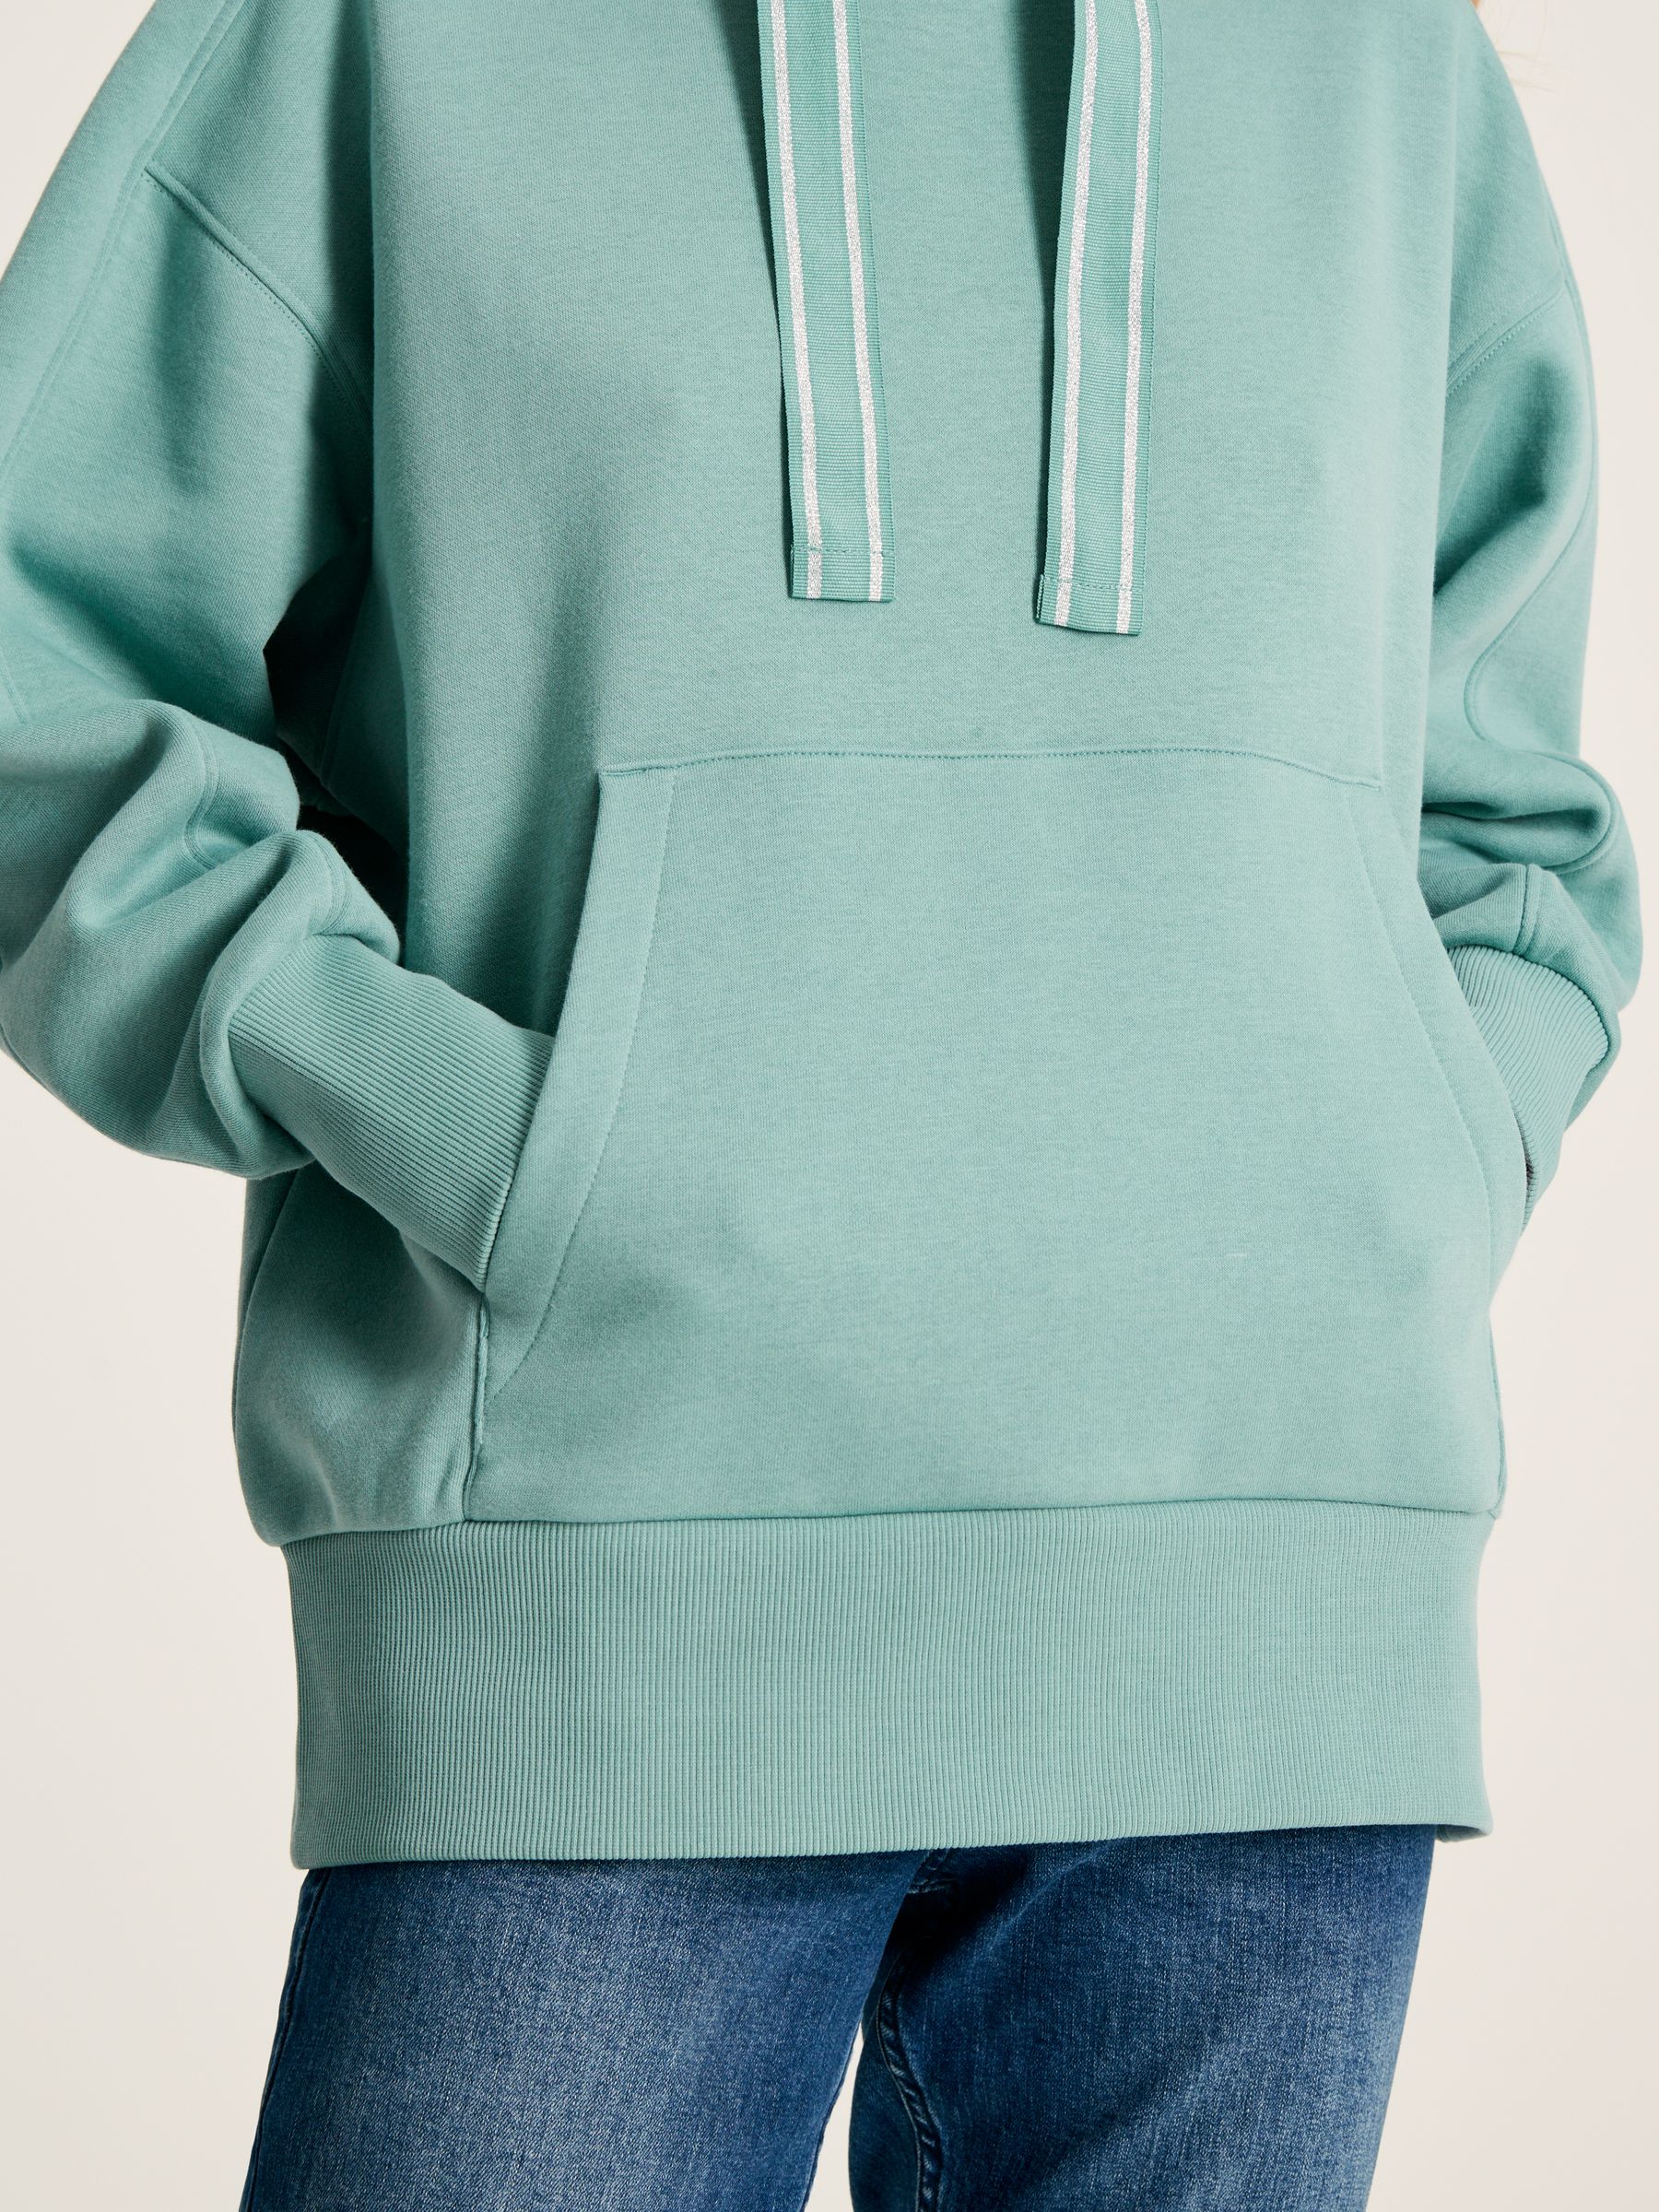 Buy Cara Blue Oversized Hoodie from the Joules online shop